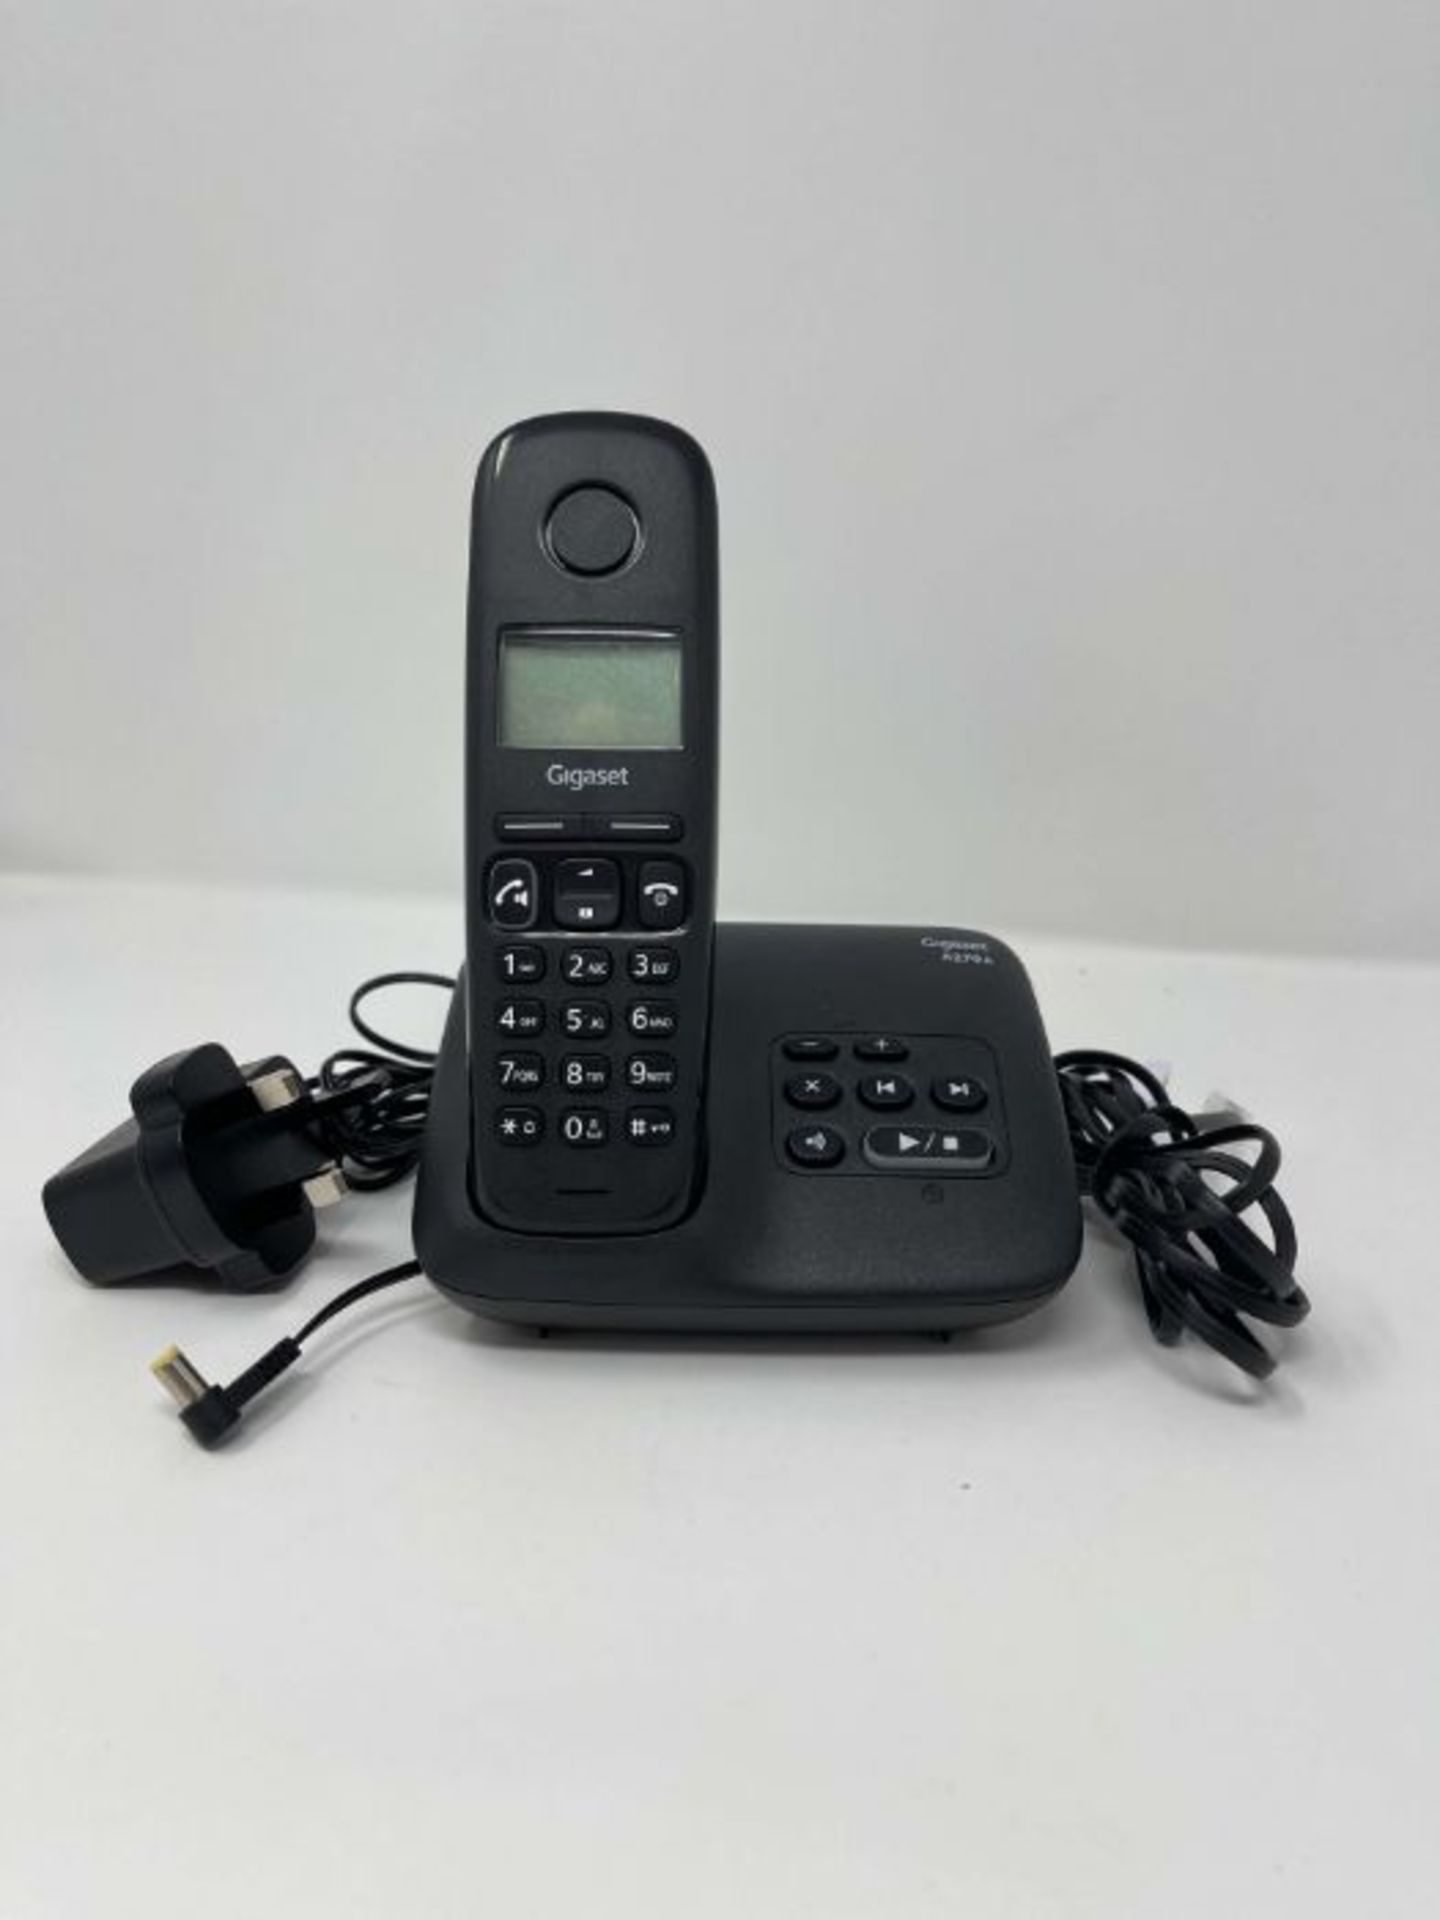 Gigaset A270A Easy to use Cordless Home Telephone with Answering Machine, Speakerphone - Image 2 of 2